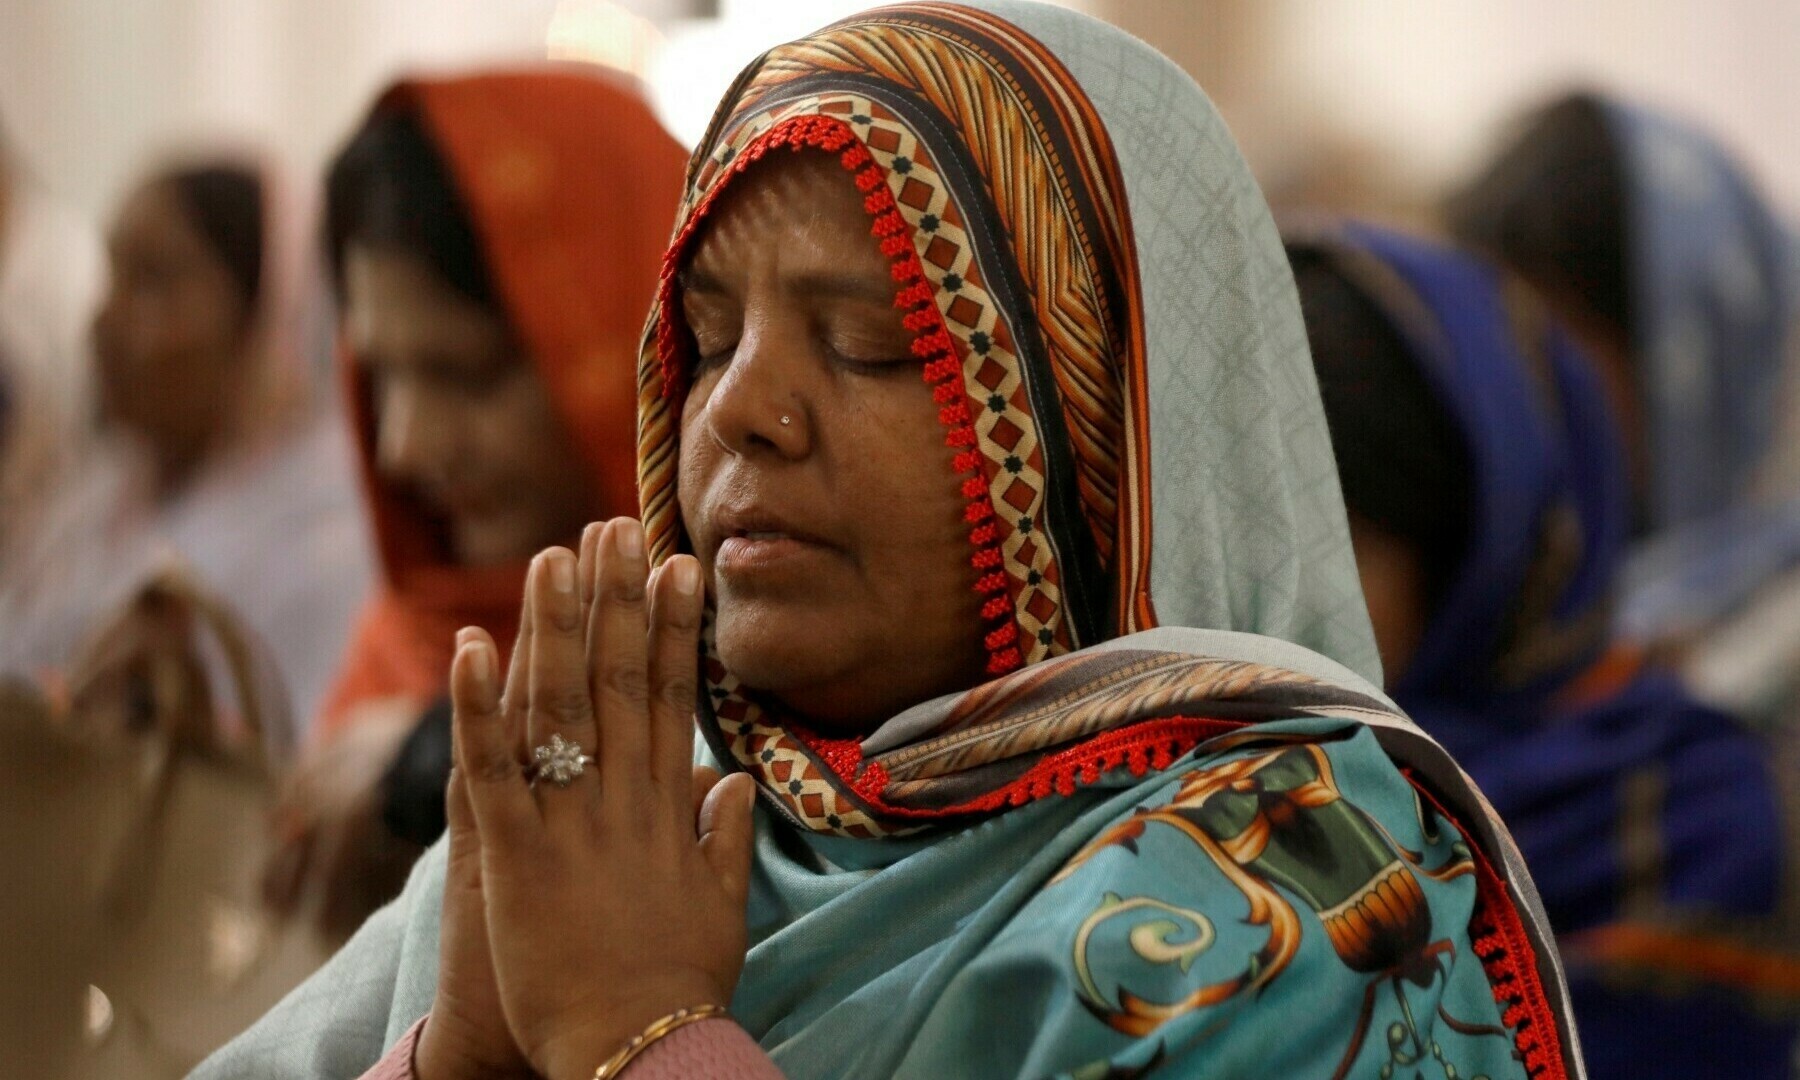 A woman, along with others, attends a Christmas Day service at the St. John’s Cathedral in Peshawar, on December 25, 2022. — Reuters